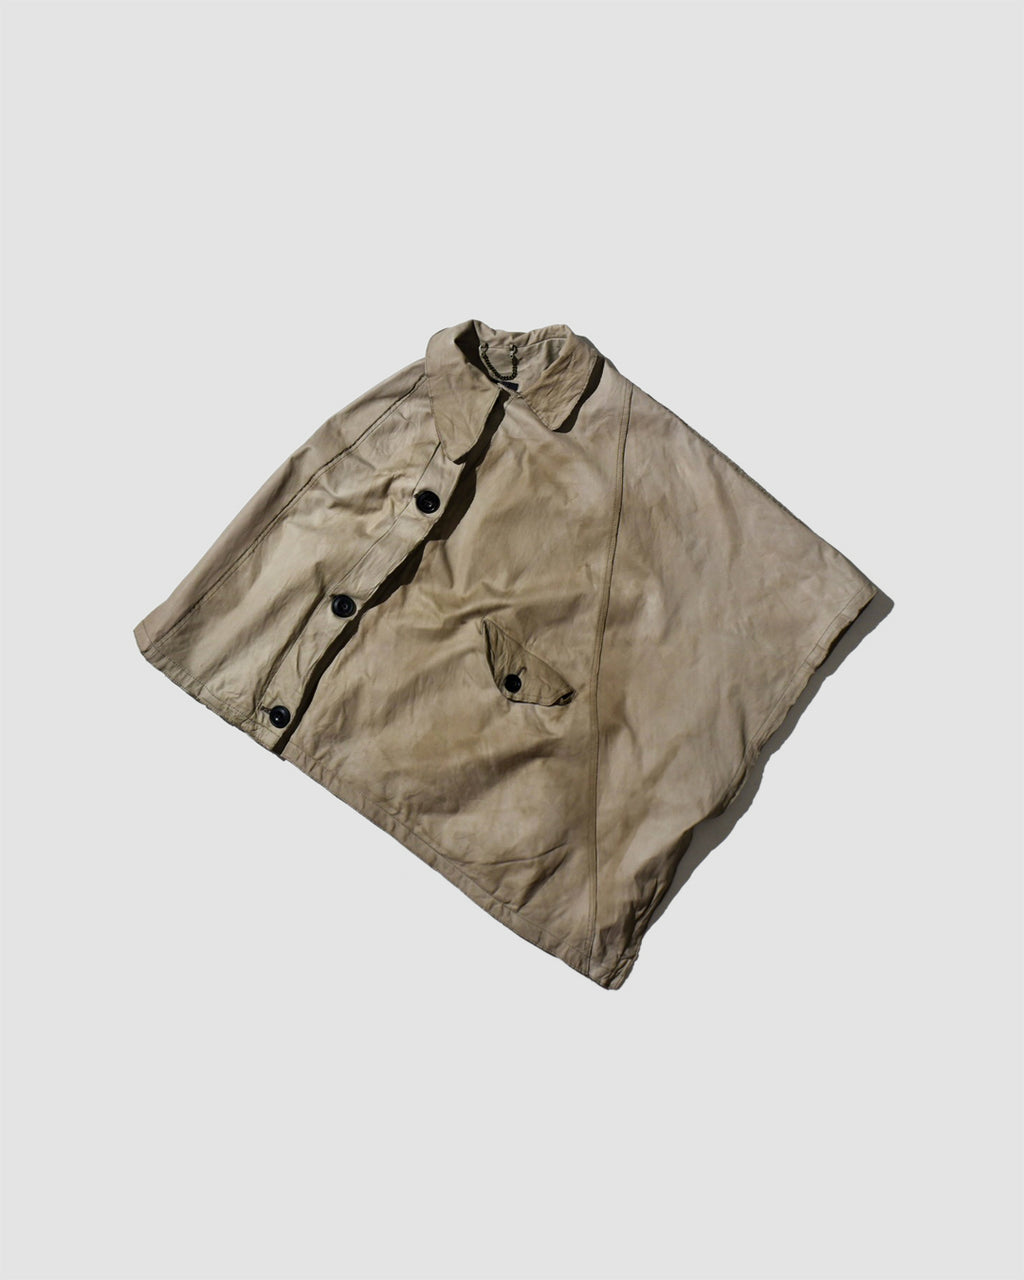 LIGHT BROWN GENUINE LEATHER PONCHO - S/M